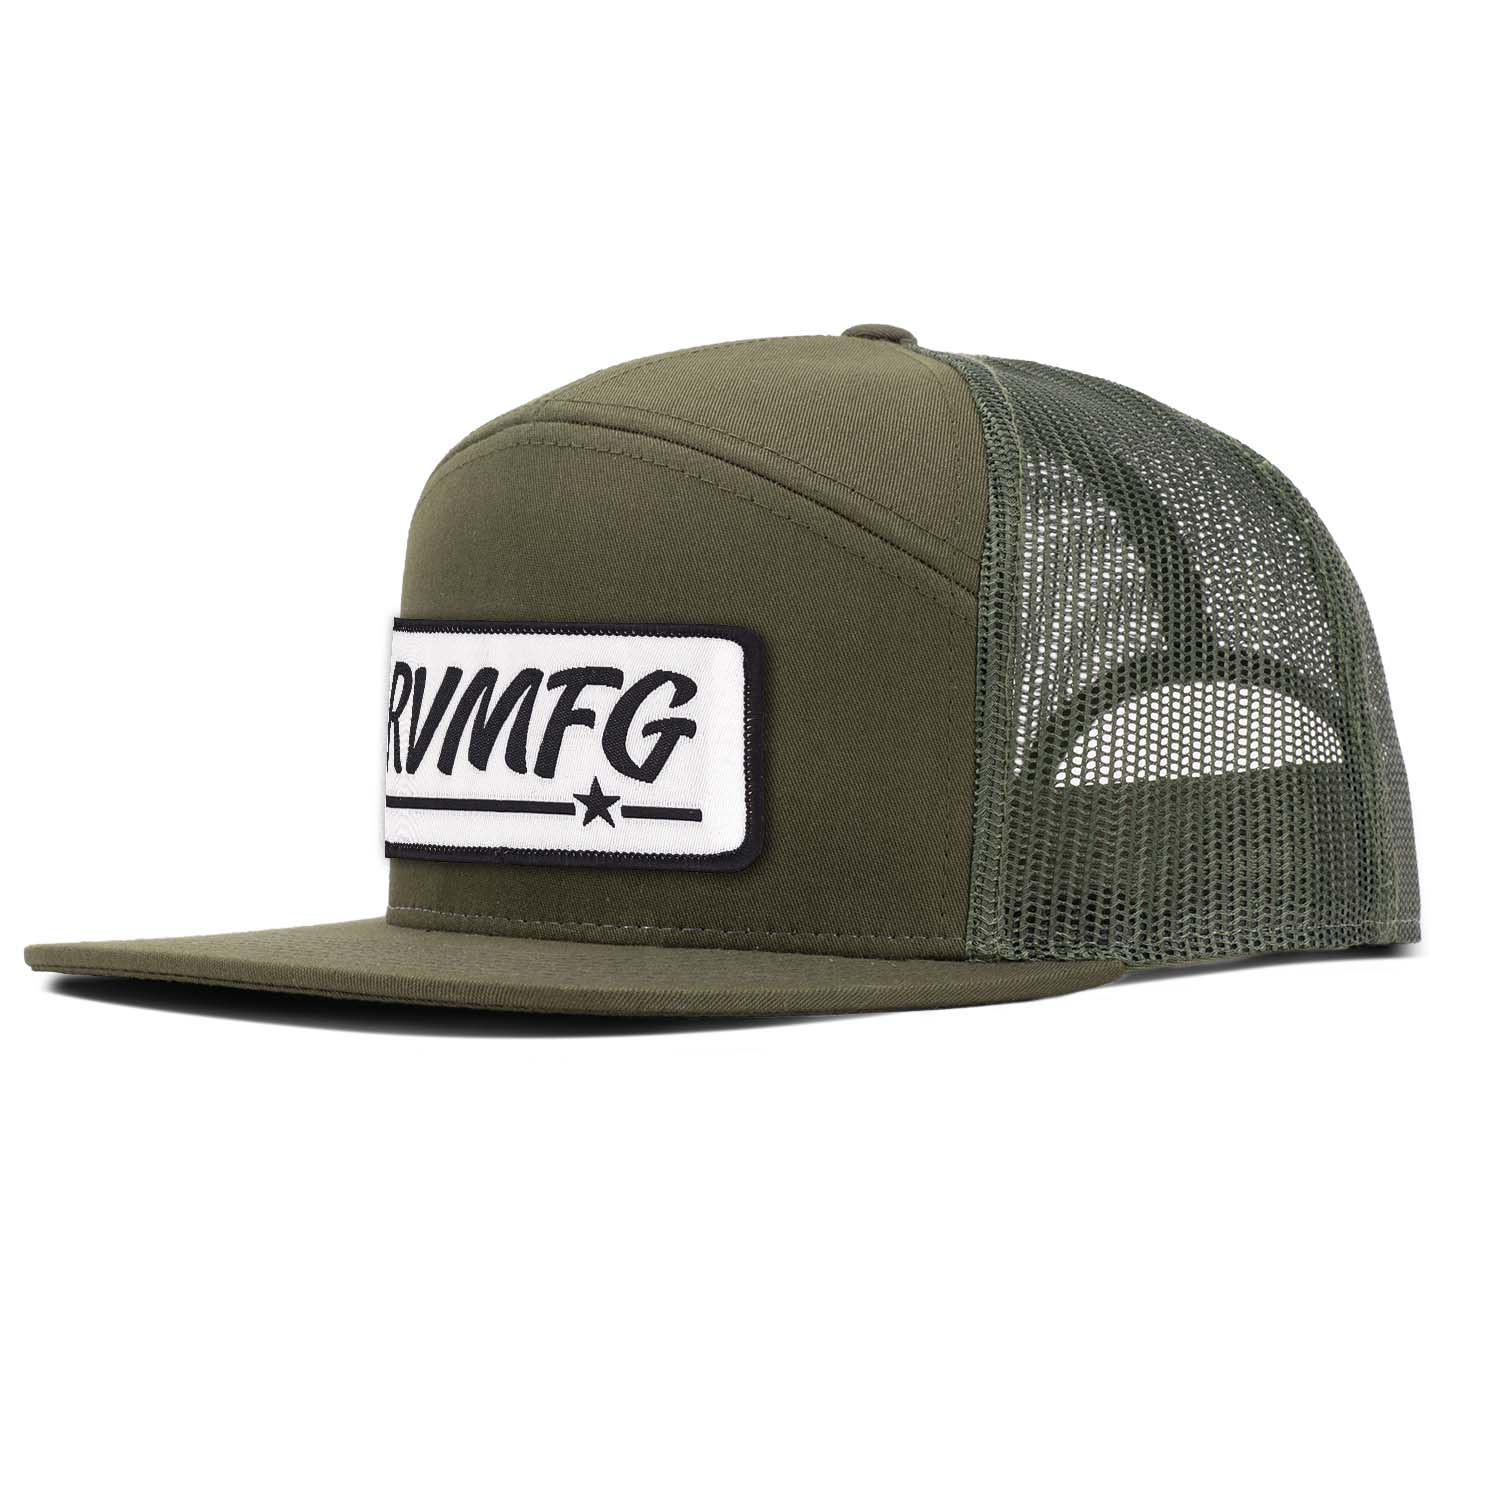 Revolution Mfg all loden green 7 panel flat bill with white RVMFG woven patch with black letters and black border